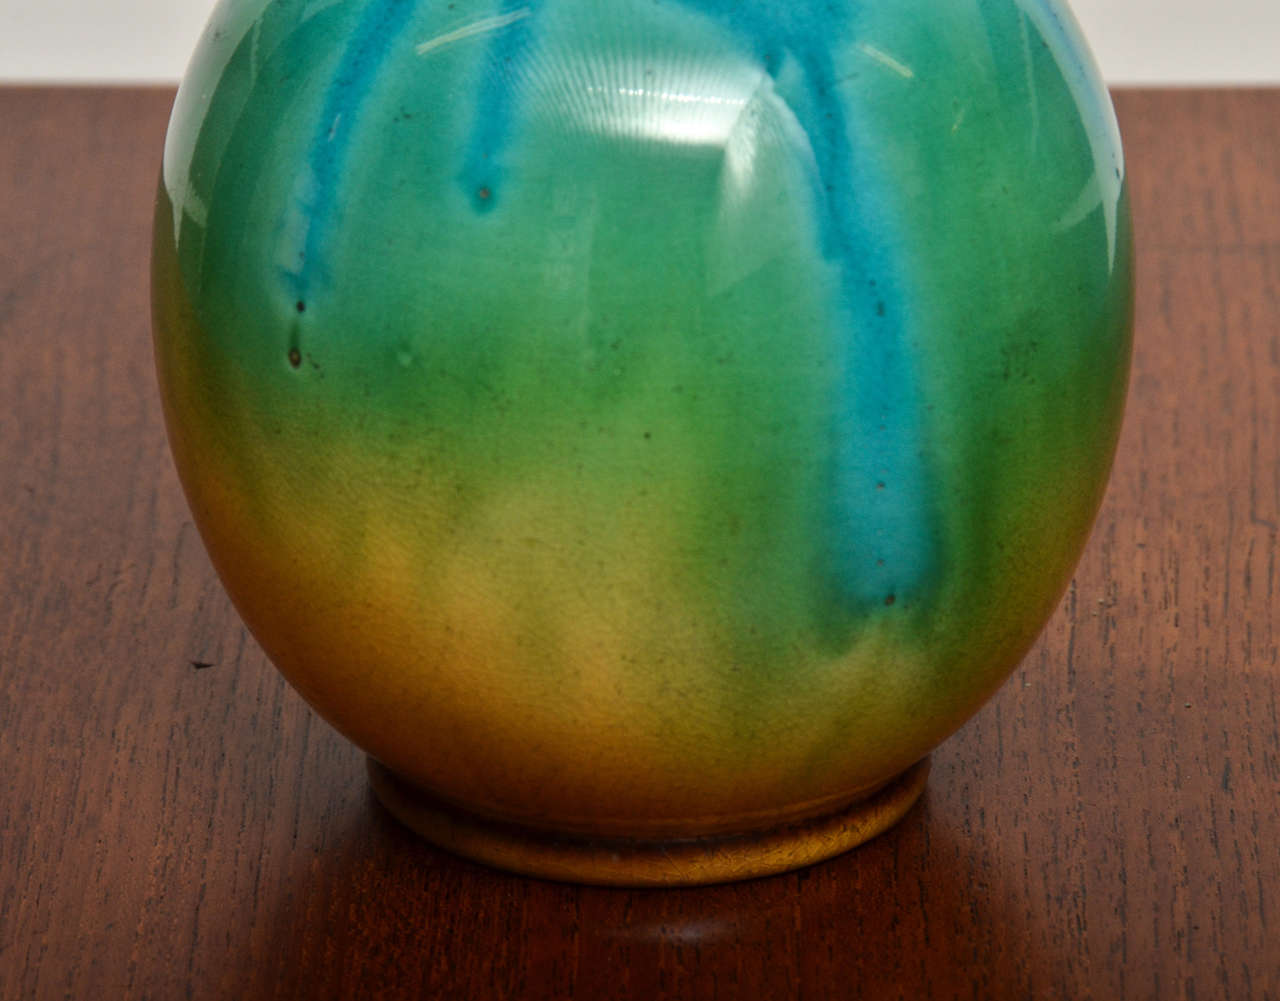 Aesthetic Movement Burmantofts Faience Vase with Yellow and Turquoise Glaze, English, circa 1880